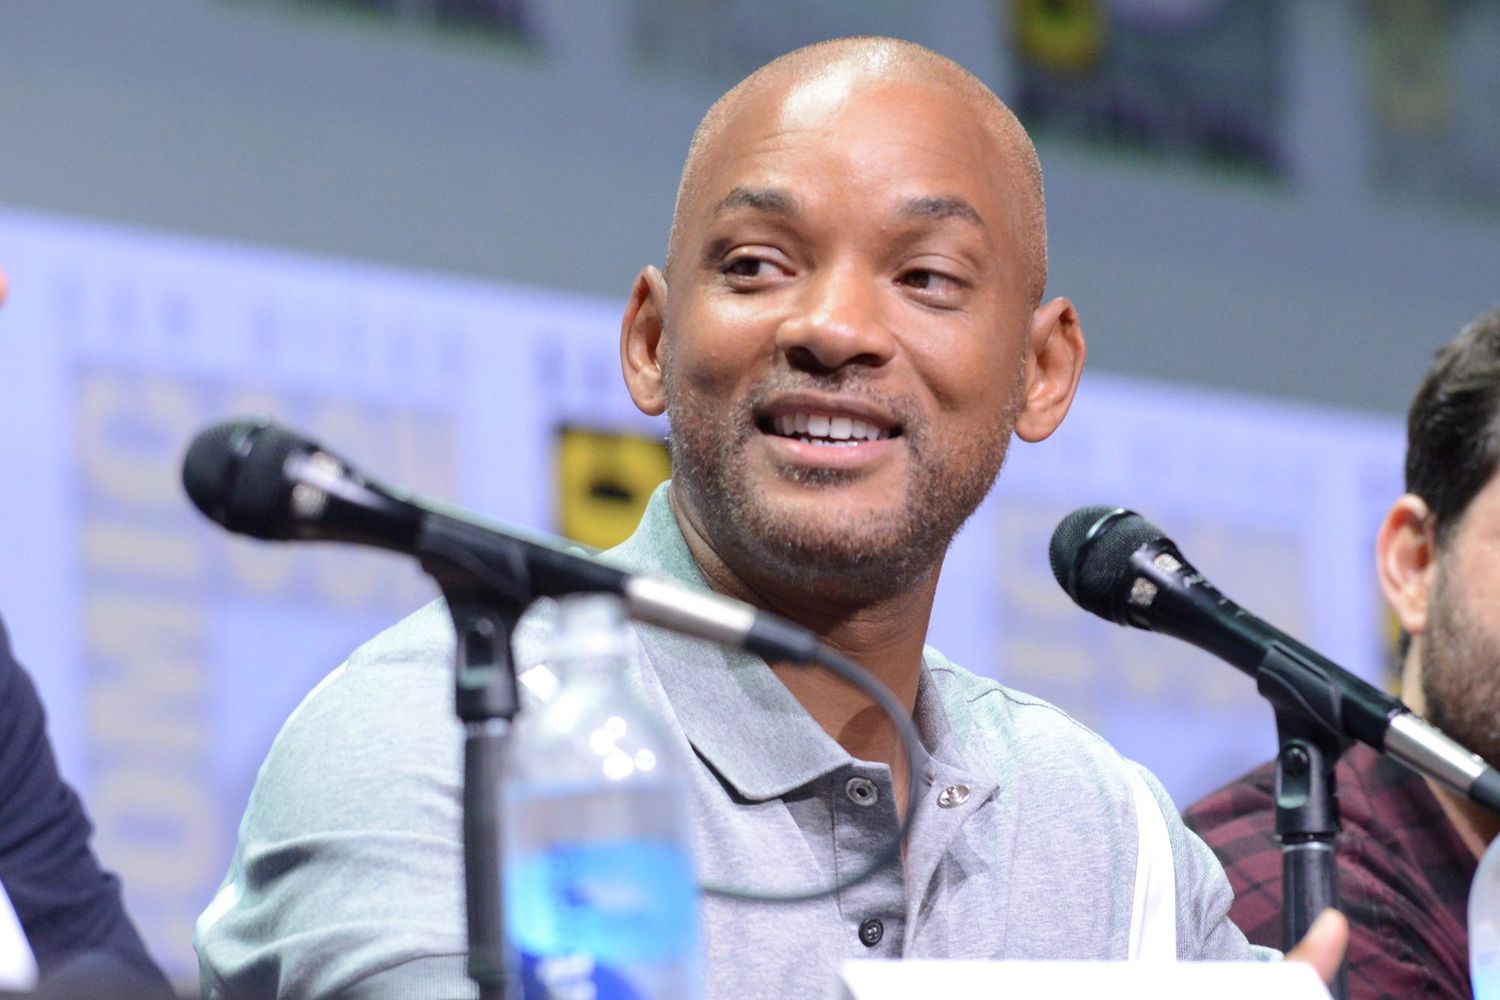 Comic-Con International 2017 - Netflix Films: "Bright" And "Death Note" Panel